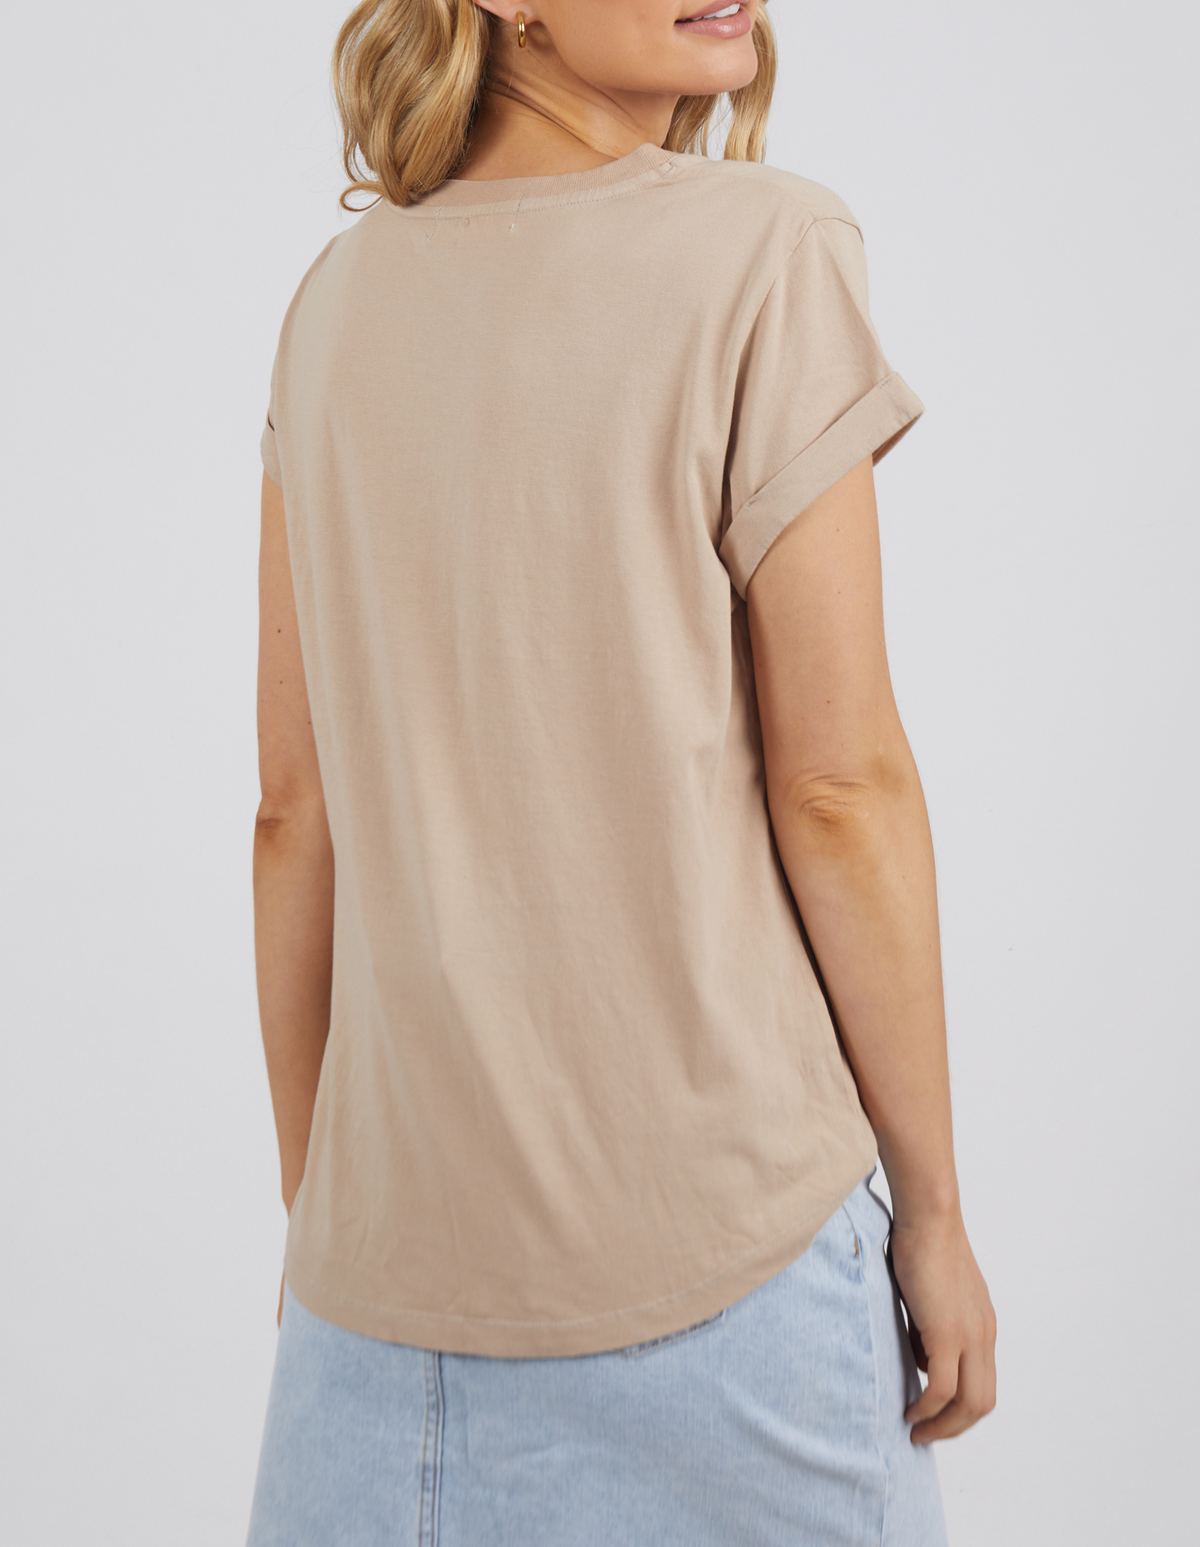 Manly Vee Tee - Oatmeal - Foxwood